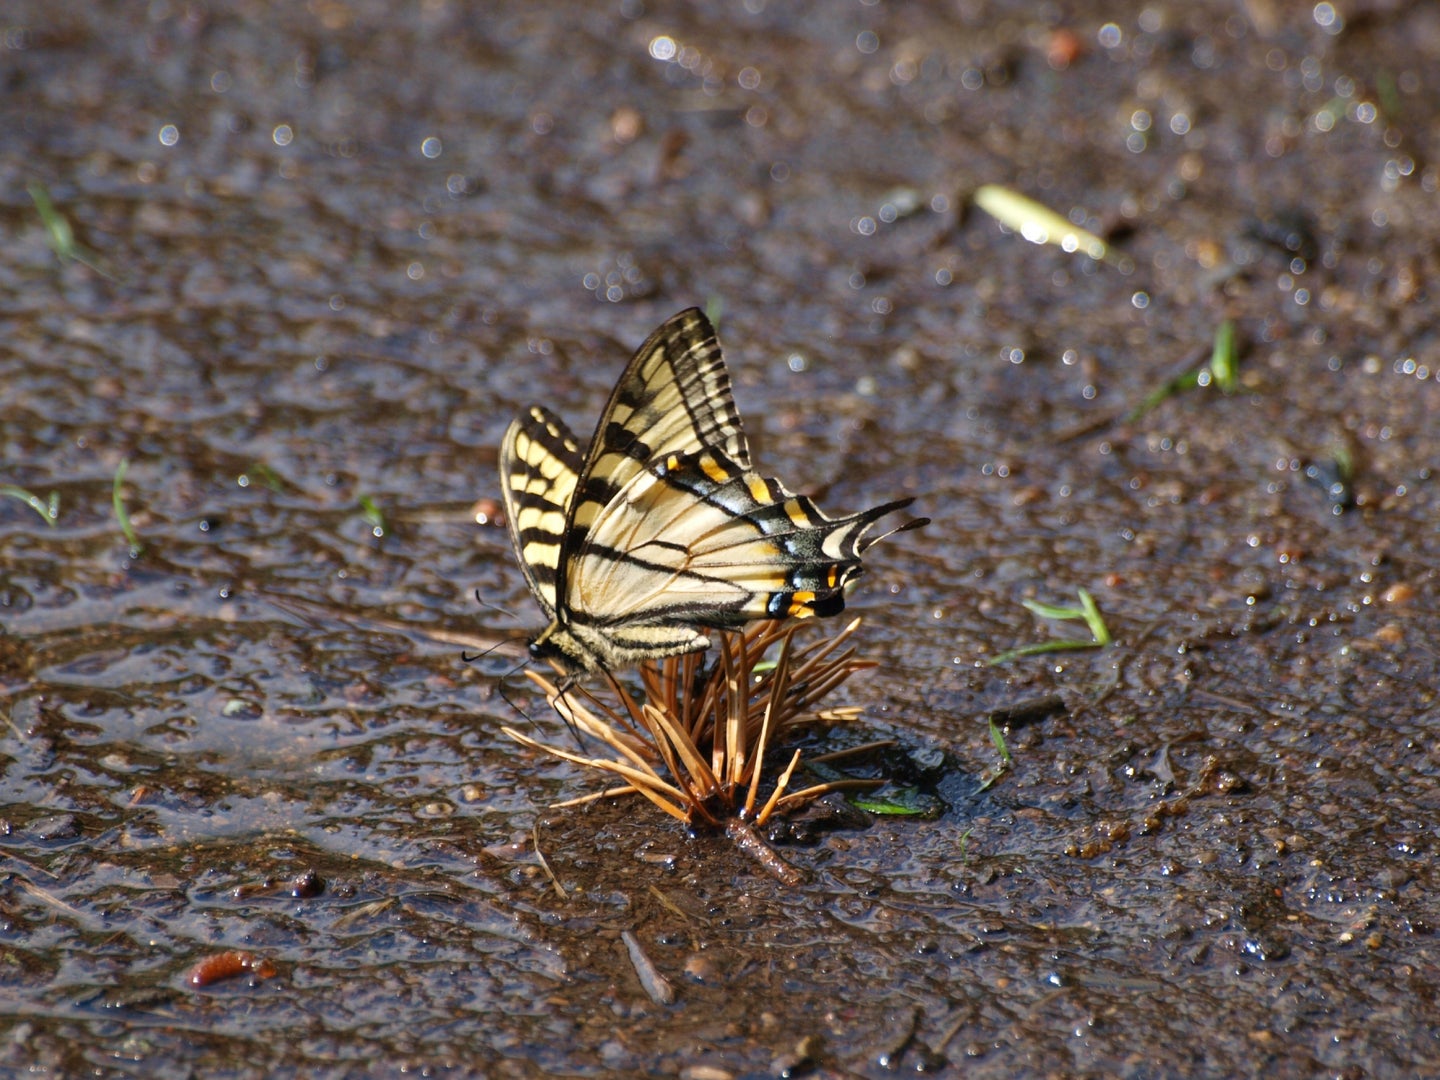 A tiger swallowtail butterfly puddling and drinking water in a muddy area.